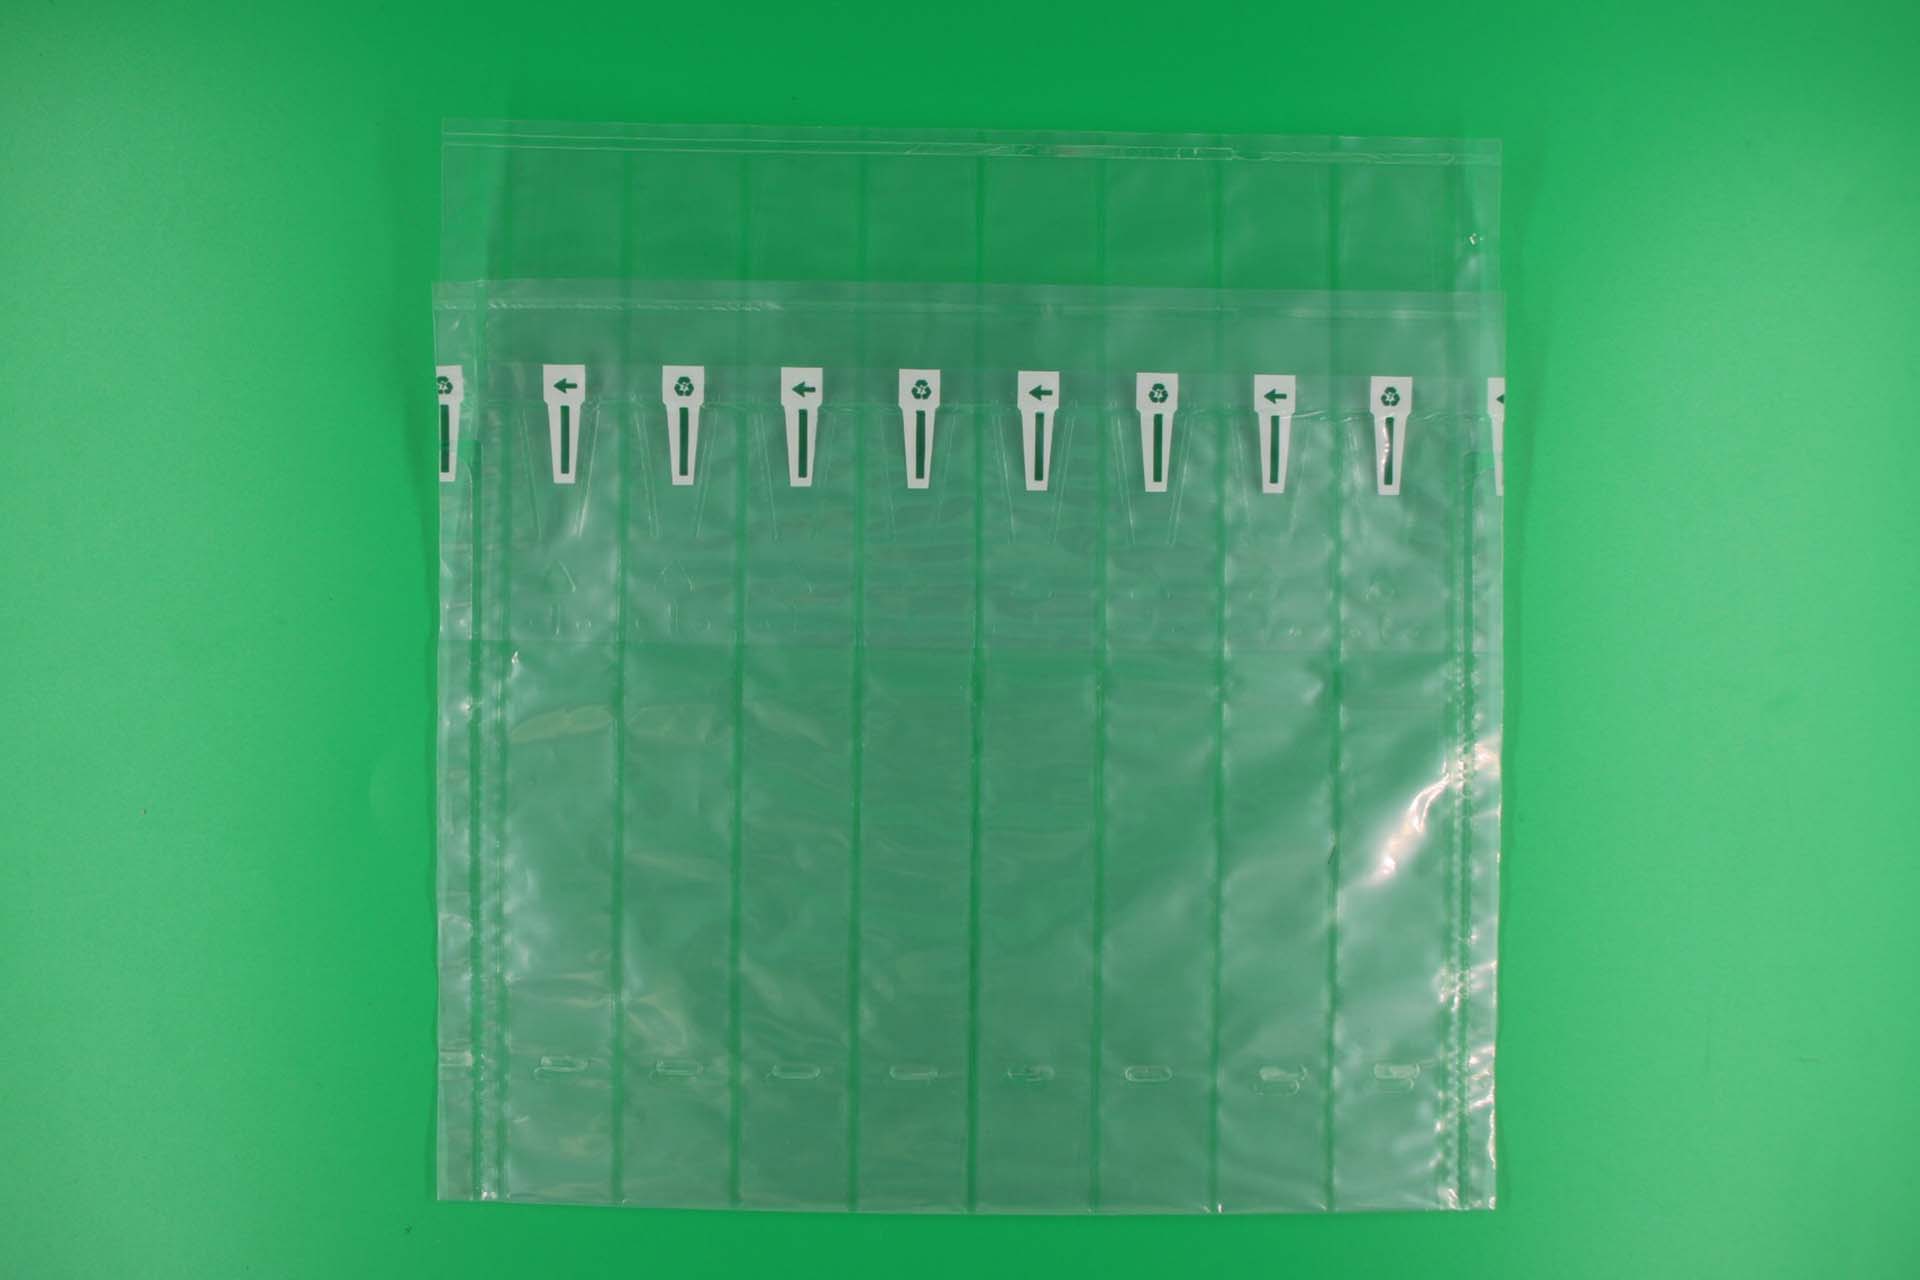 air pouch packaging delivery shape air column bag Sunshinepack Brand